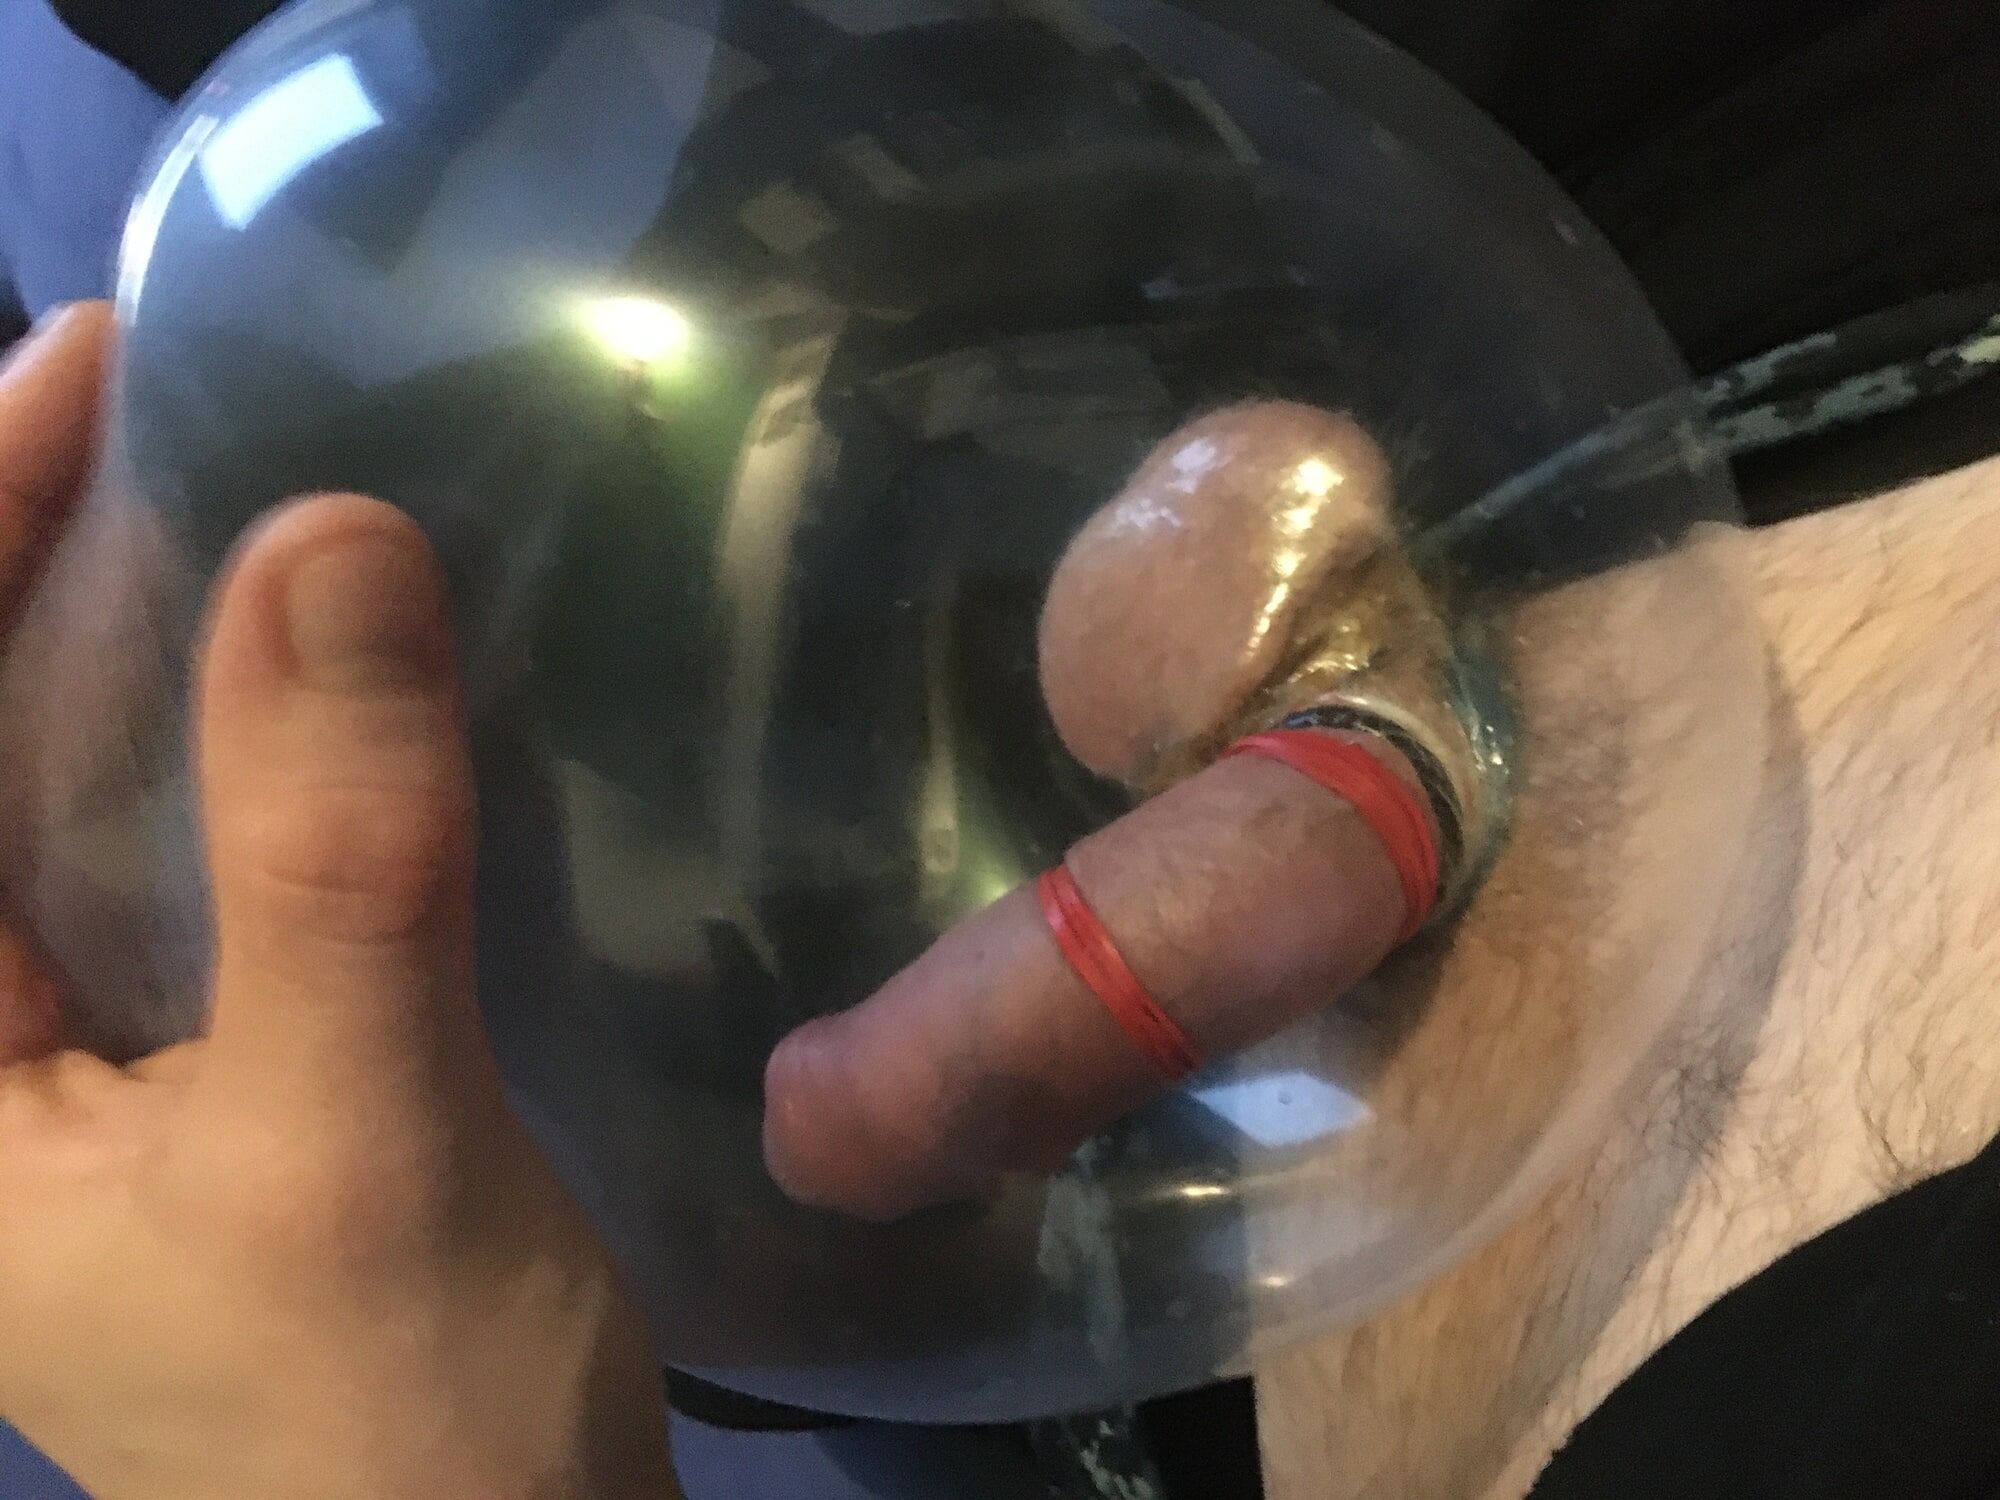  Haired Dick And Balls With Rubber Bands Condom Ballon  fuck #50